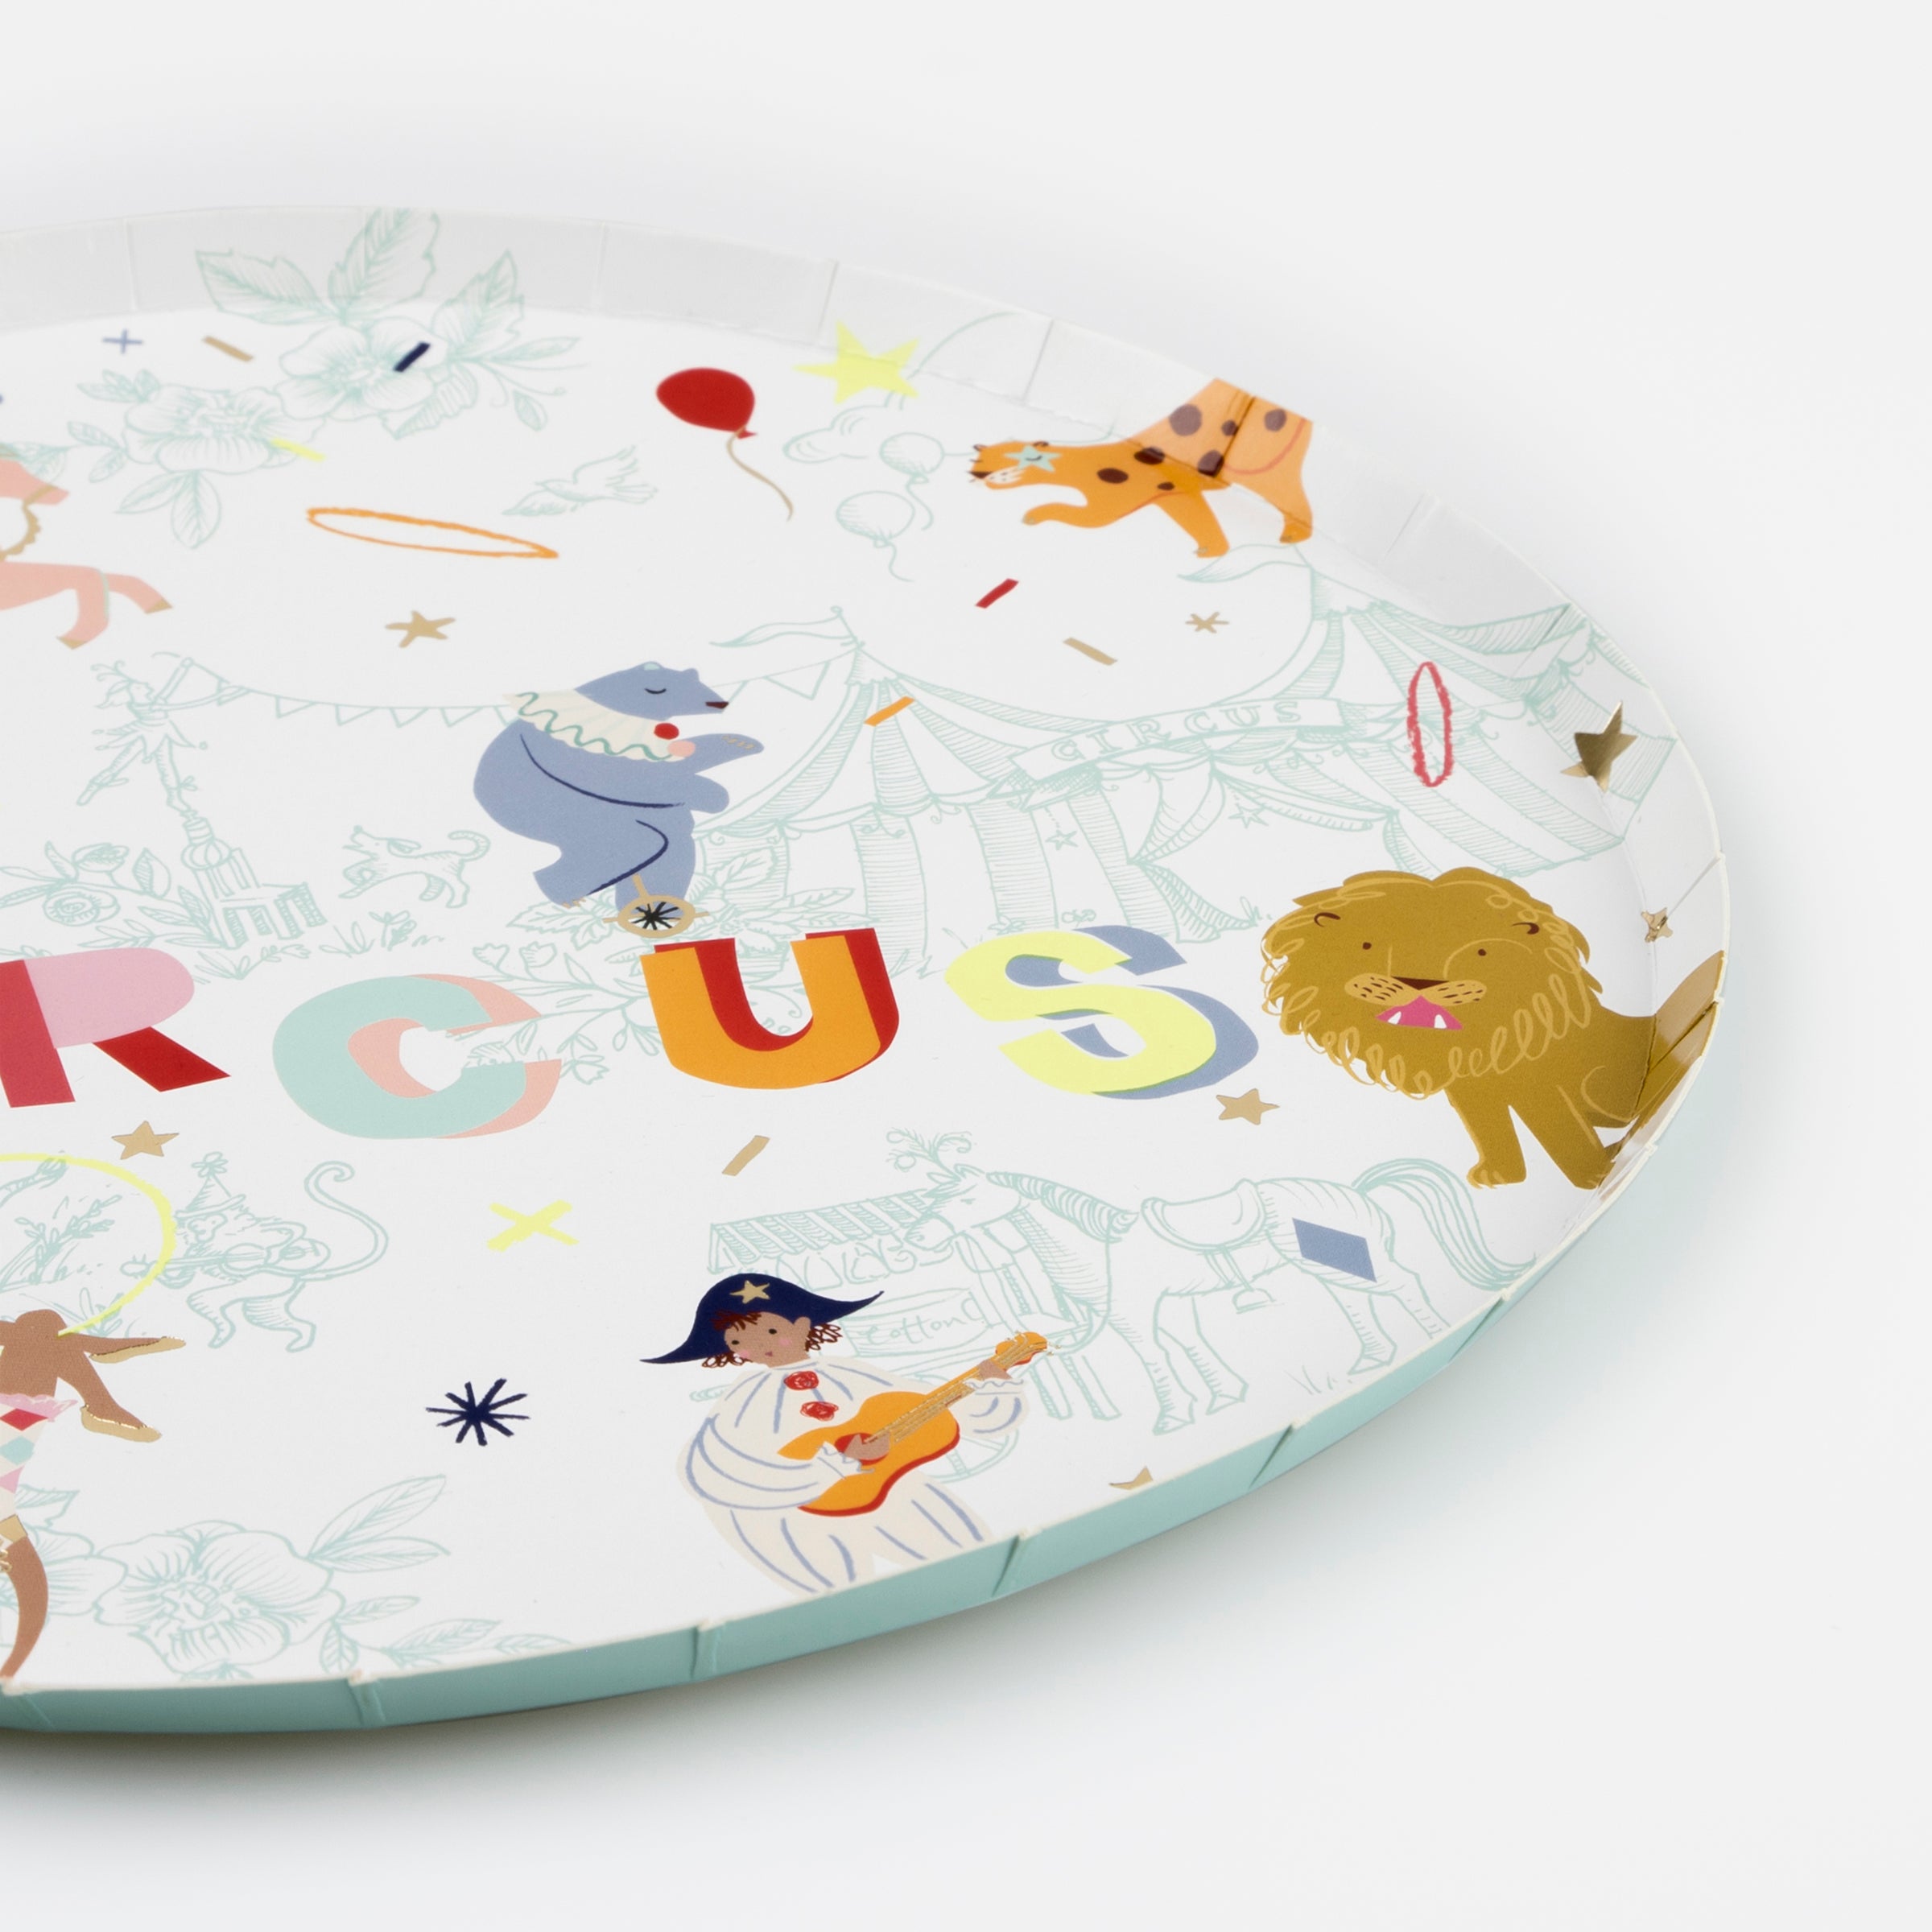 Our party plates feature classic circus icons, make these plates ideal for a circus themed party.